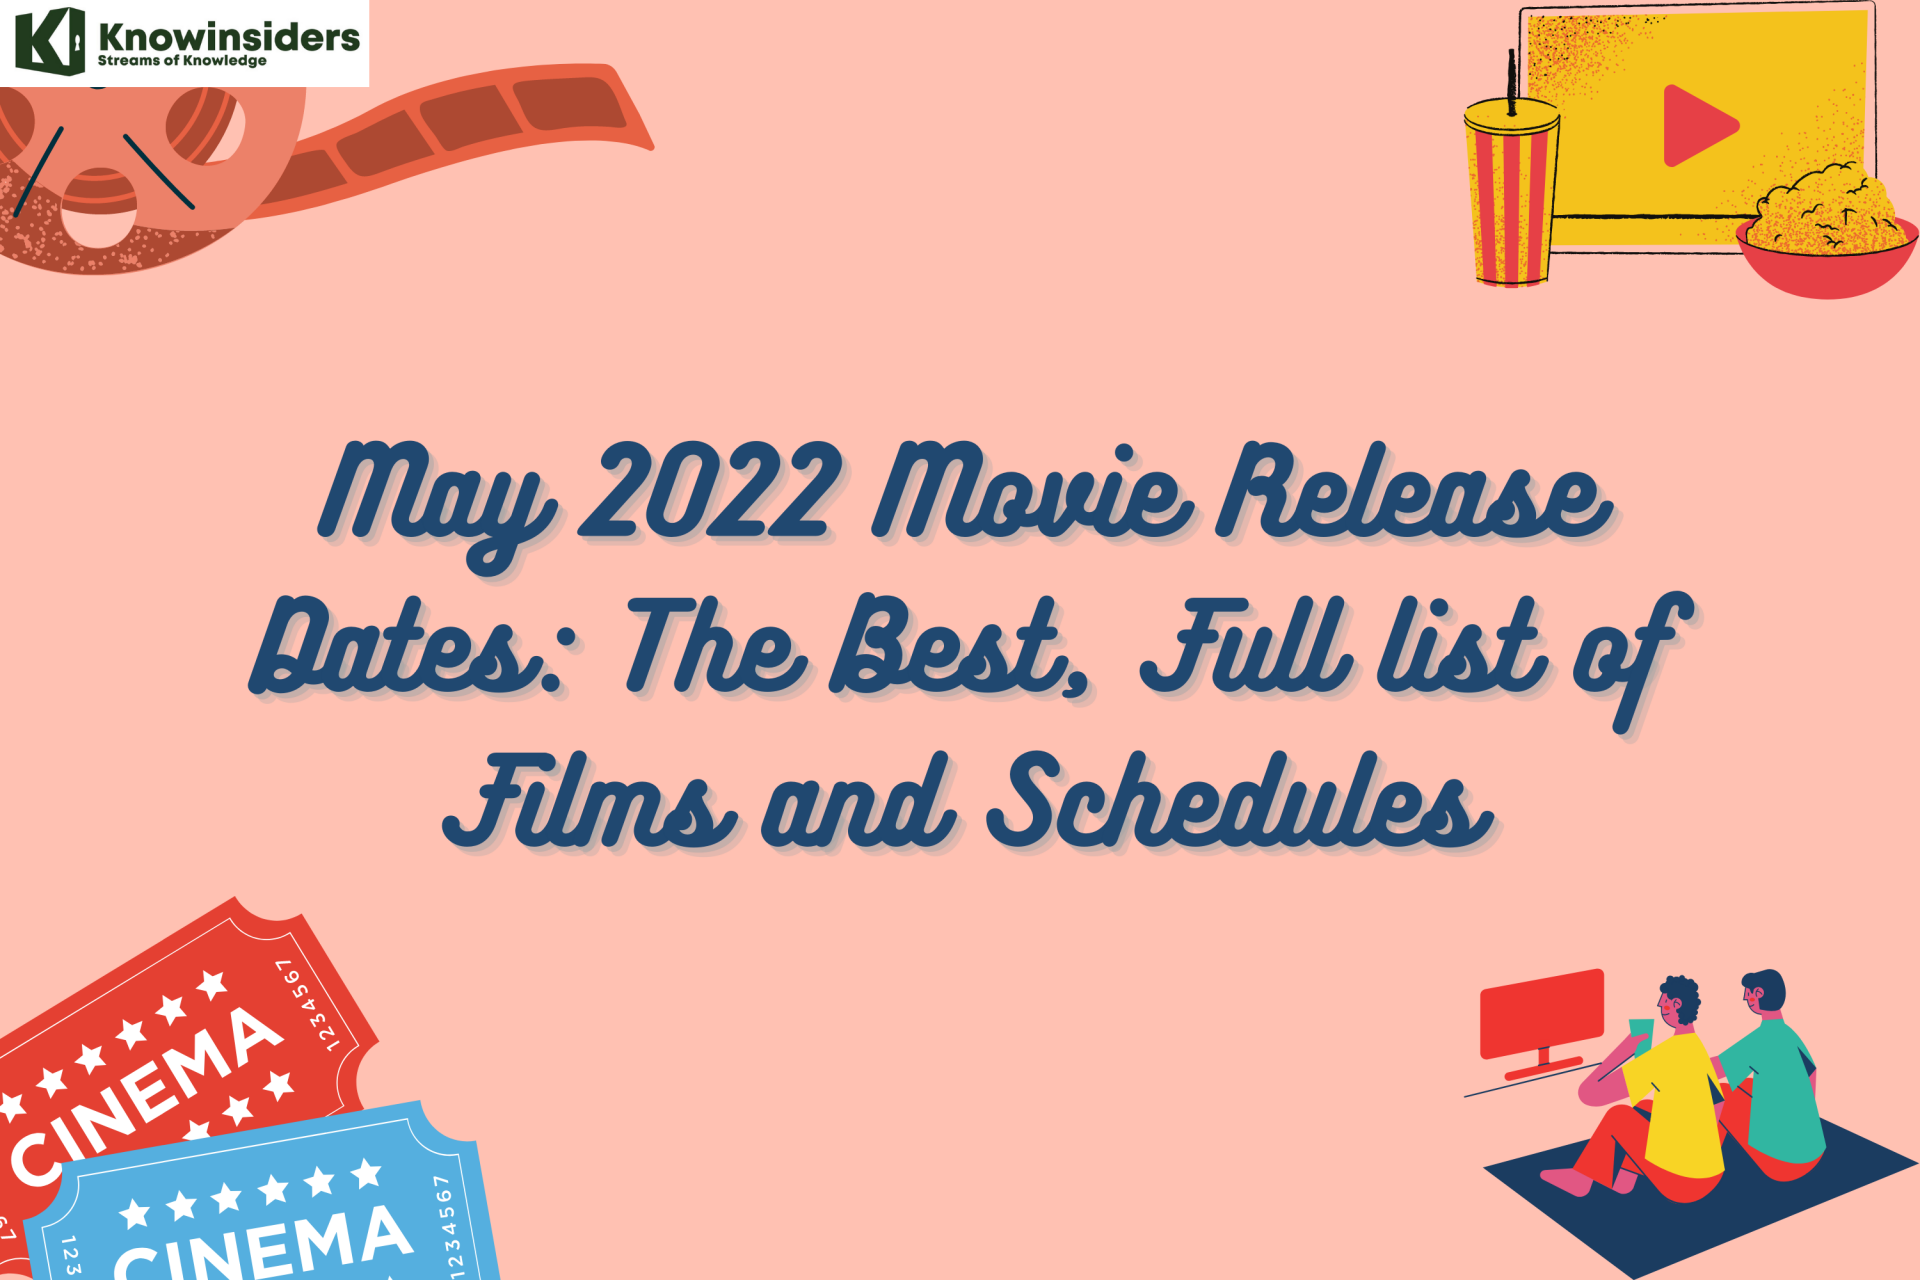 may 2022 movie release dates the best full list of films and schedules in usa